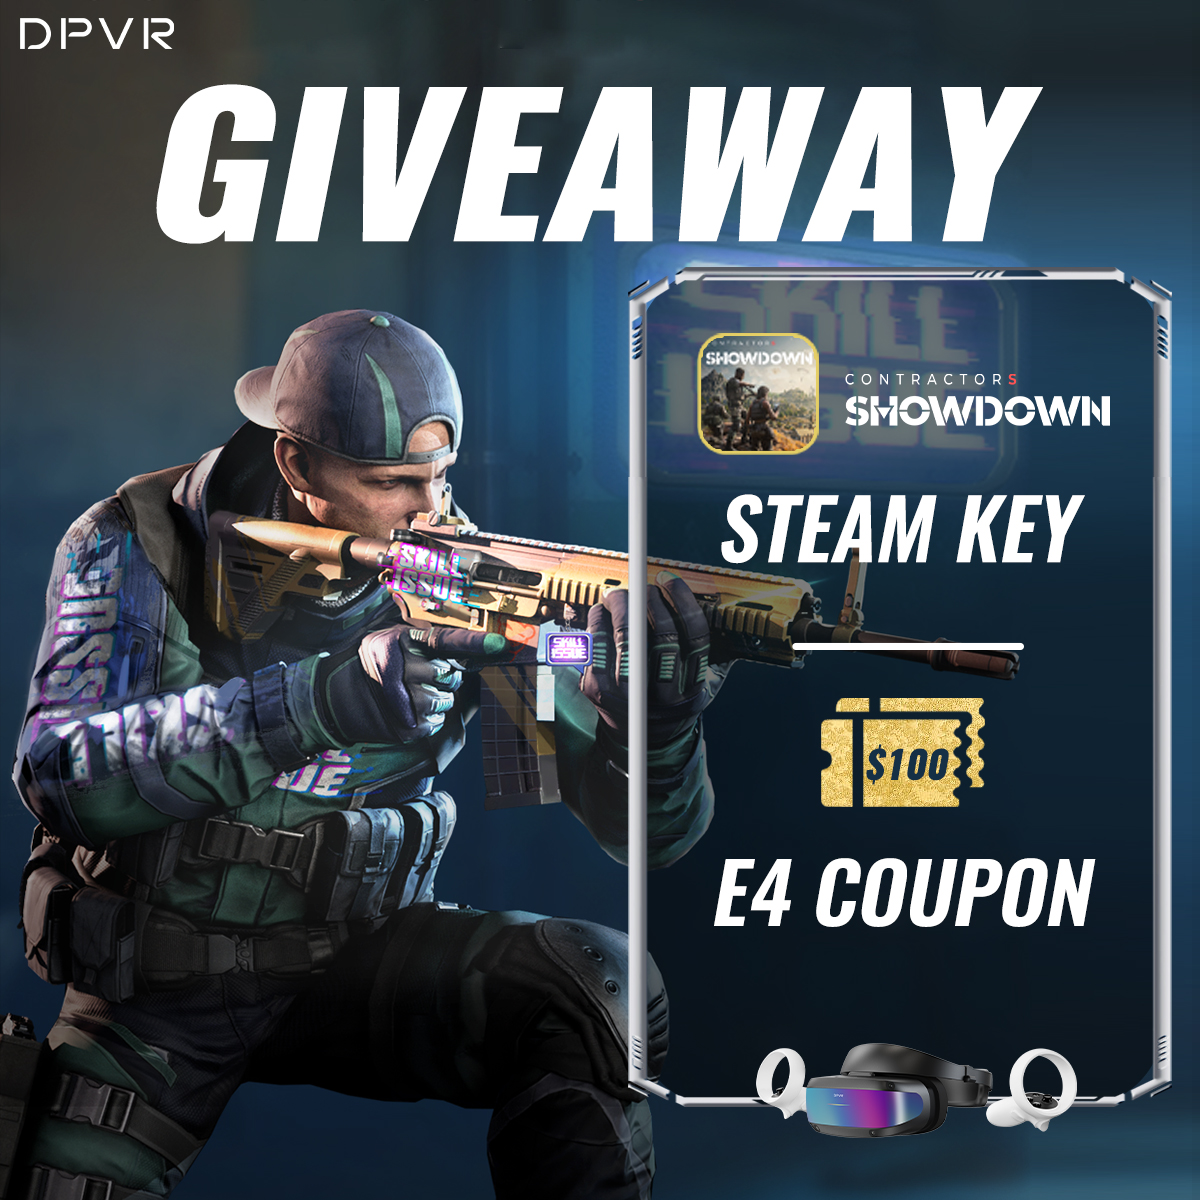 🚨 VR GAME #GIVEAWAY 🚨
To celebrate Contractors Showdown new launch, we're giving away: 

🗝️ Steam key 
🎫 $100 E4 coupon

To enter:
-Retweet
-Follow me & @ContractorsBR

Winner picked on May 15th.